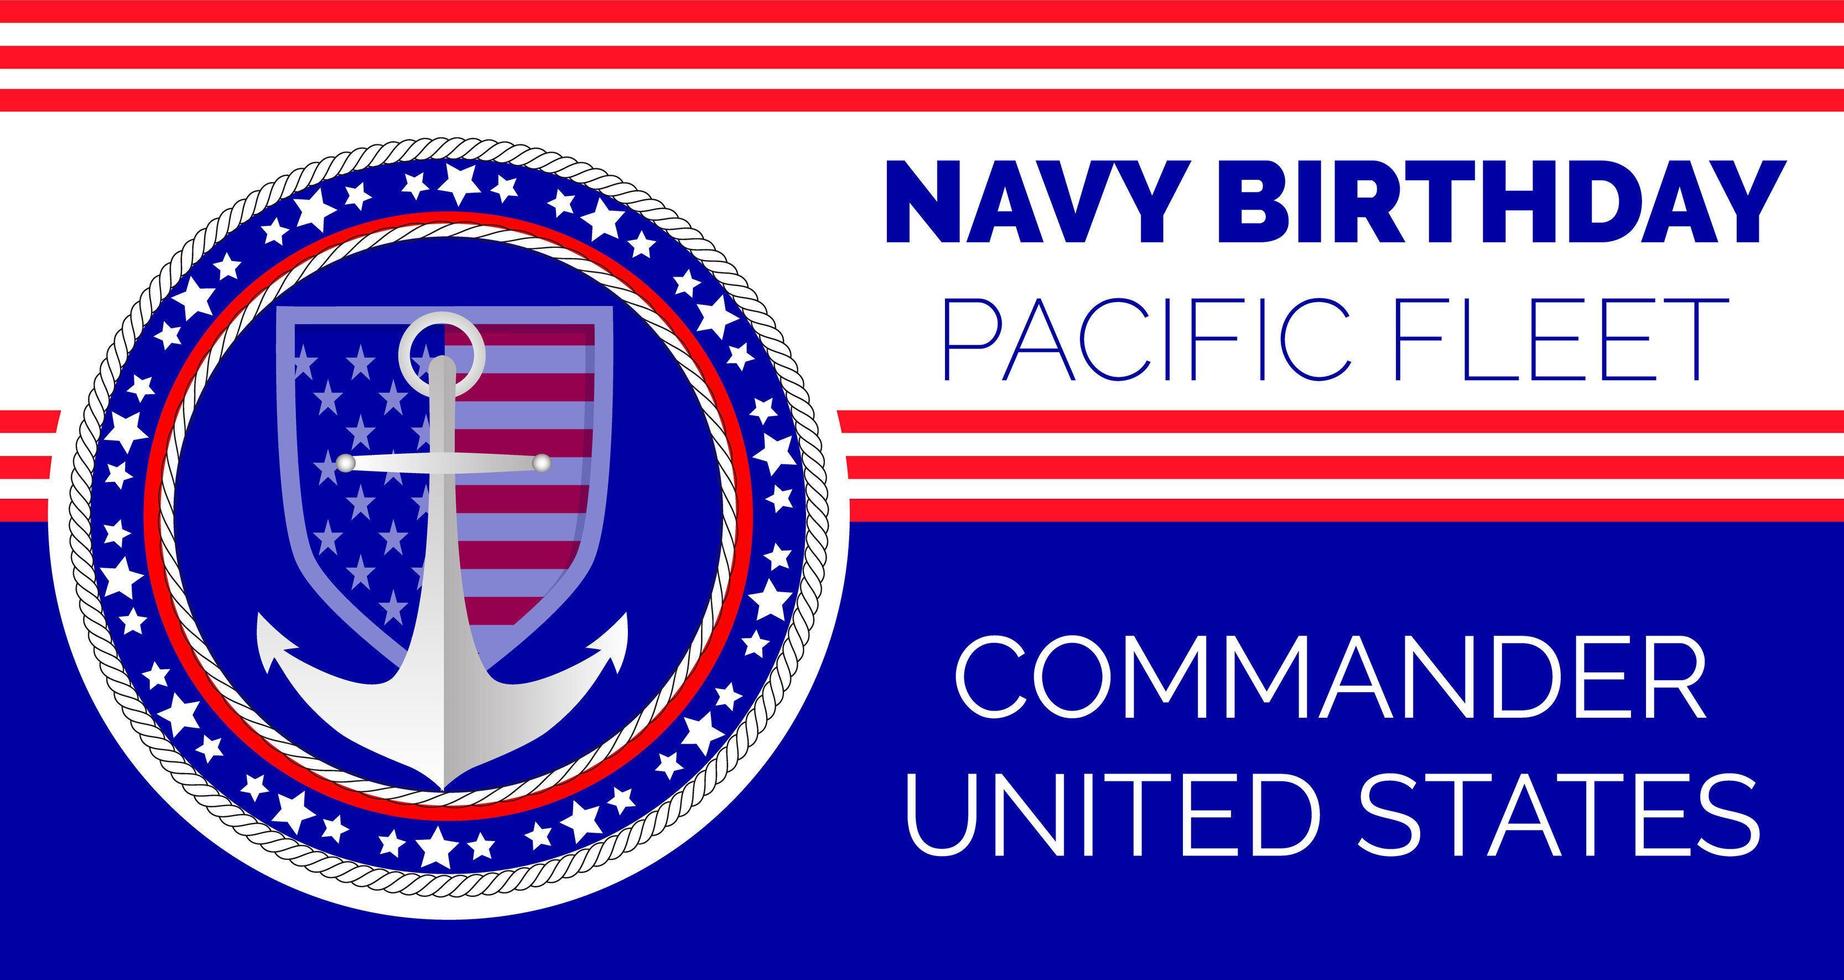 Navy birthday celebrated in 13th October 13th in United States. vector